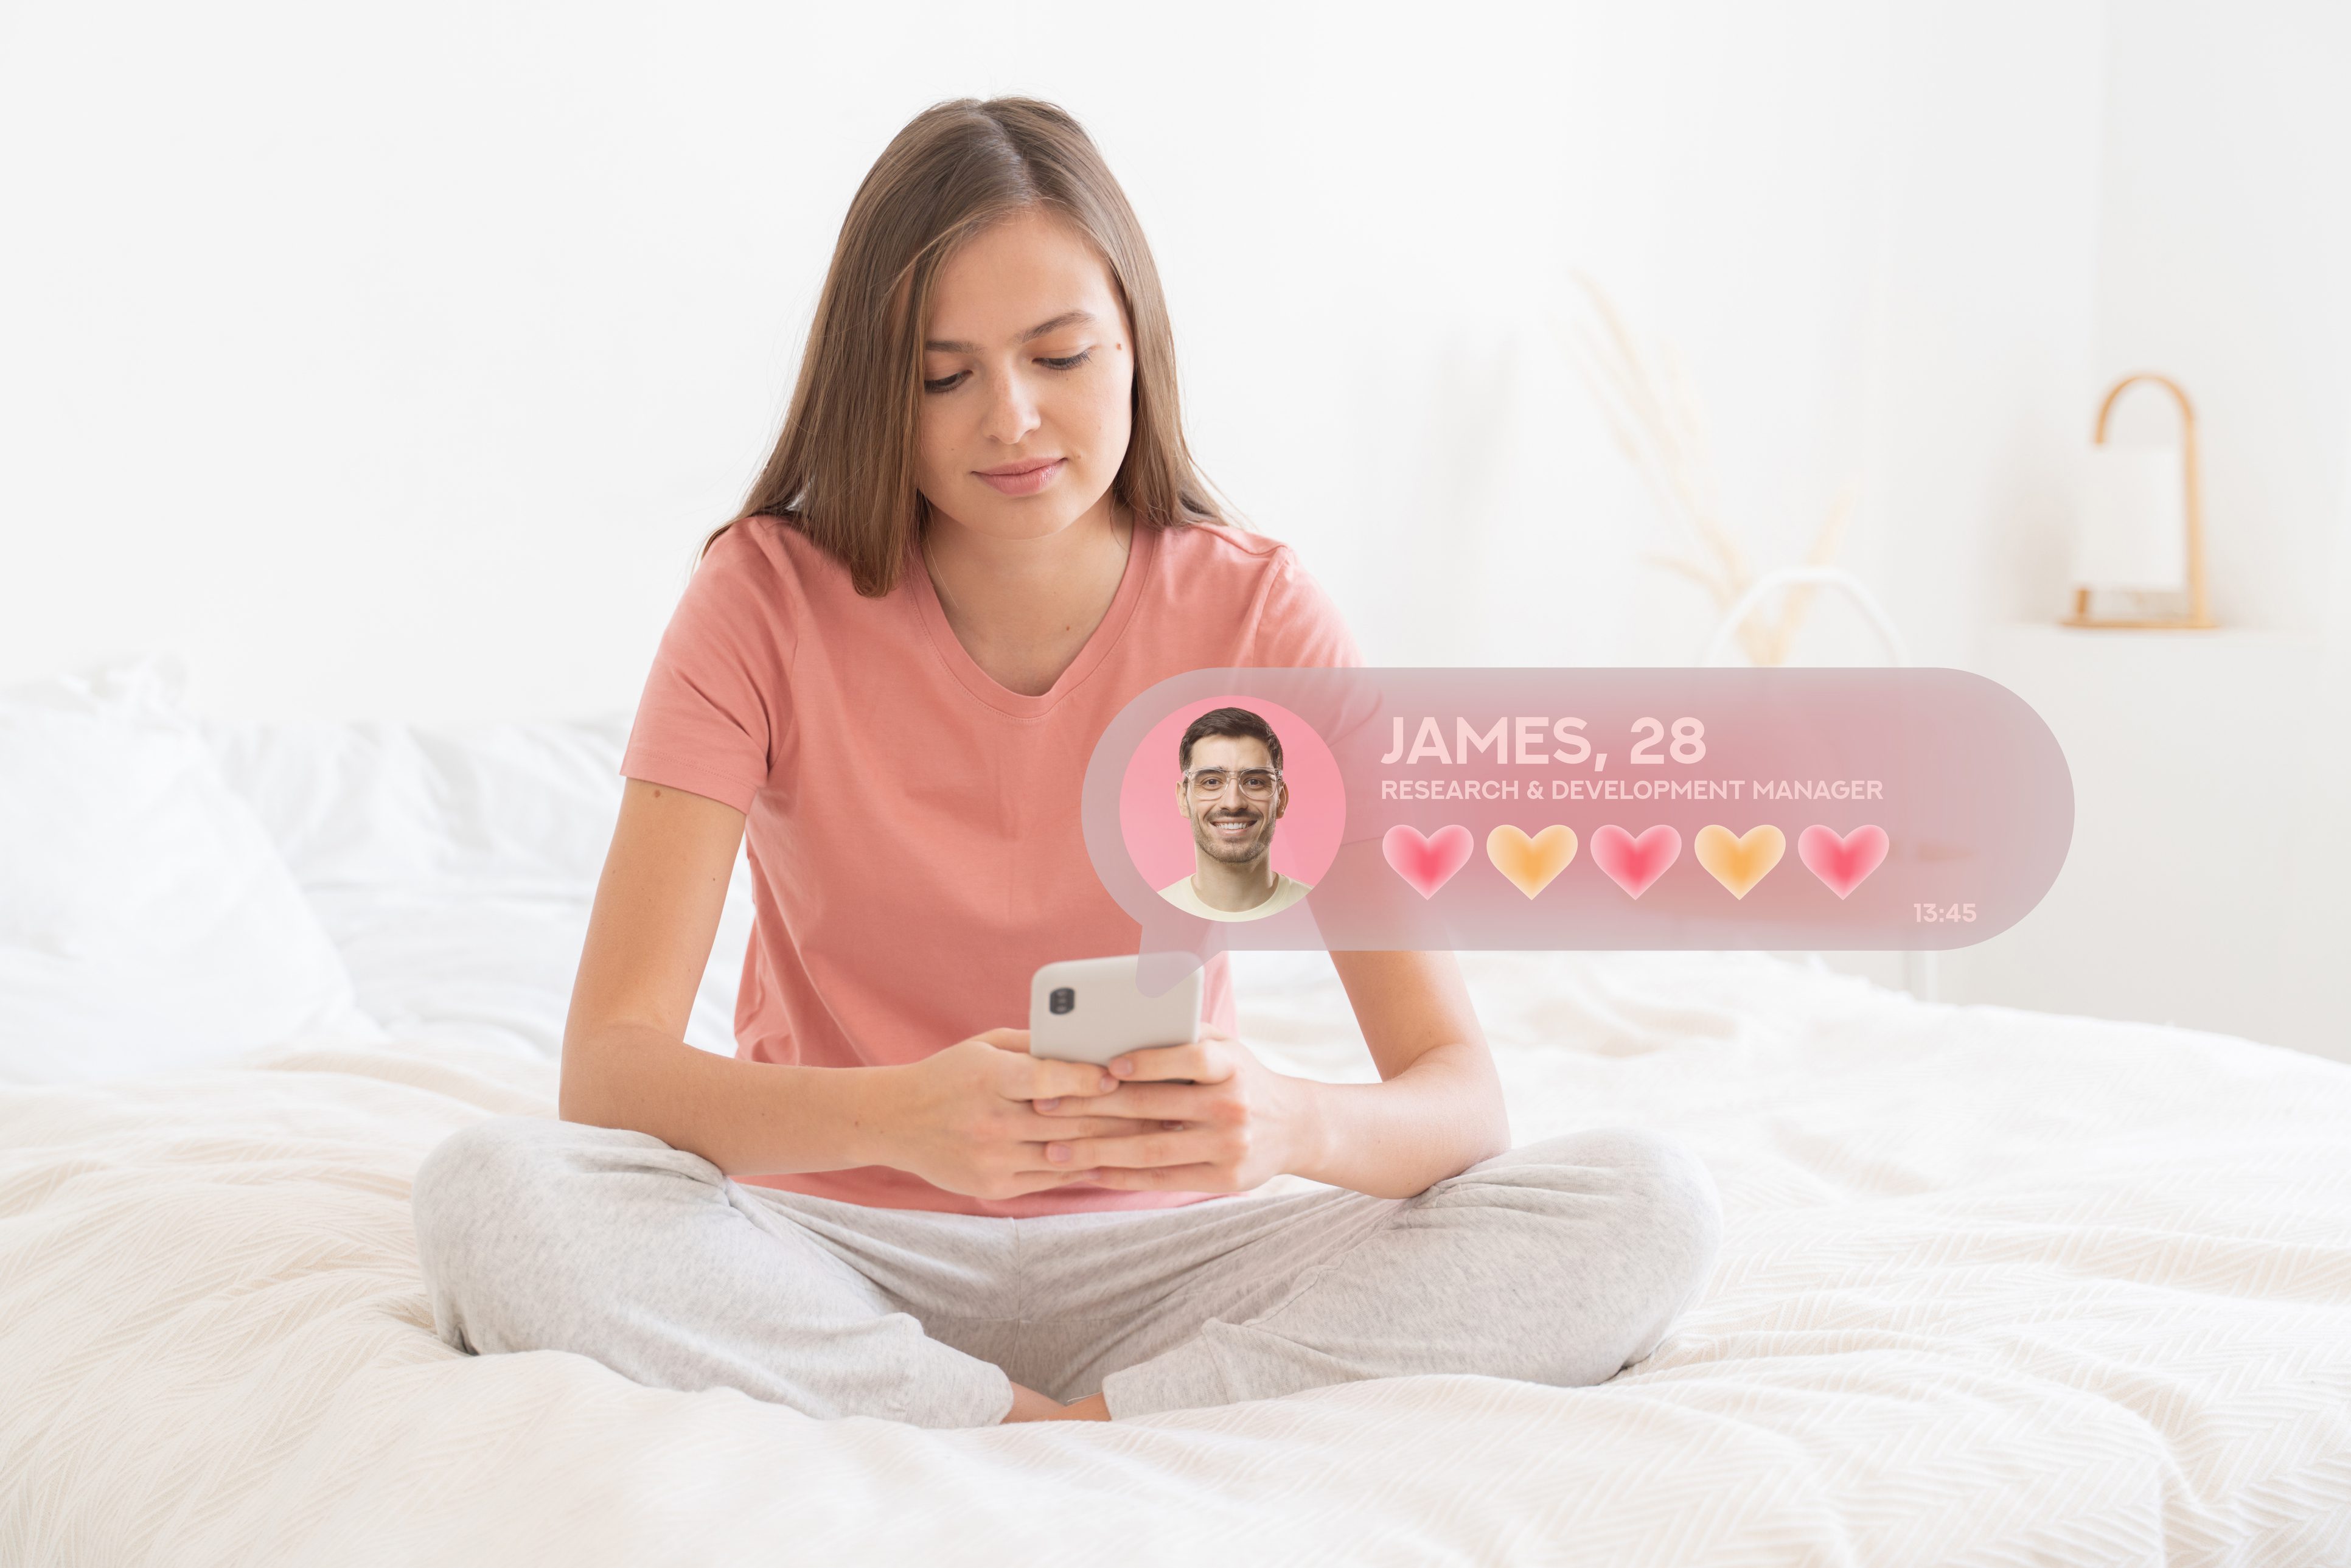 Online Dating: Do I Look Like My Photos?